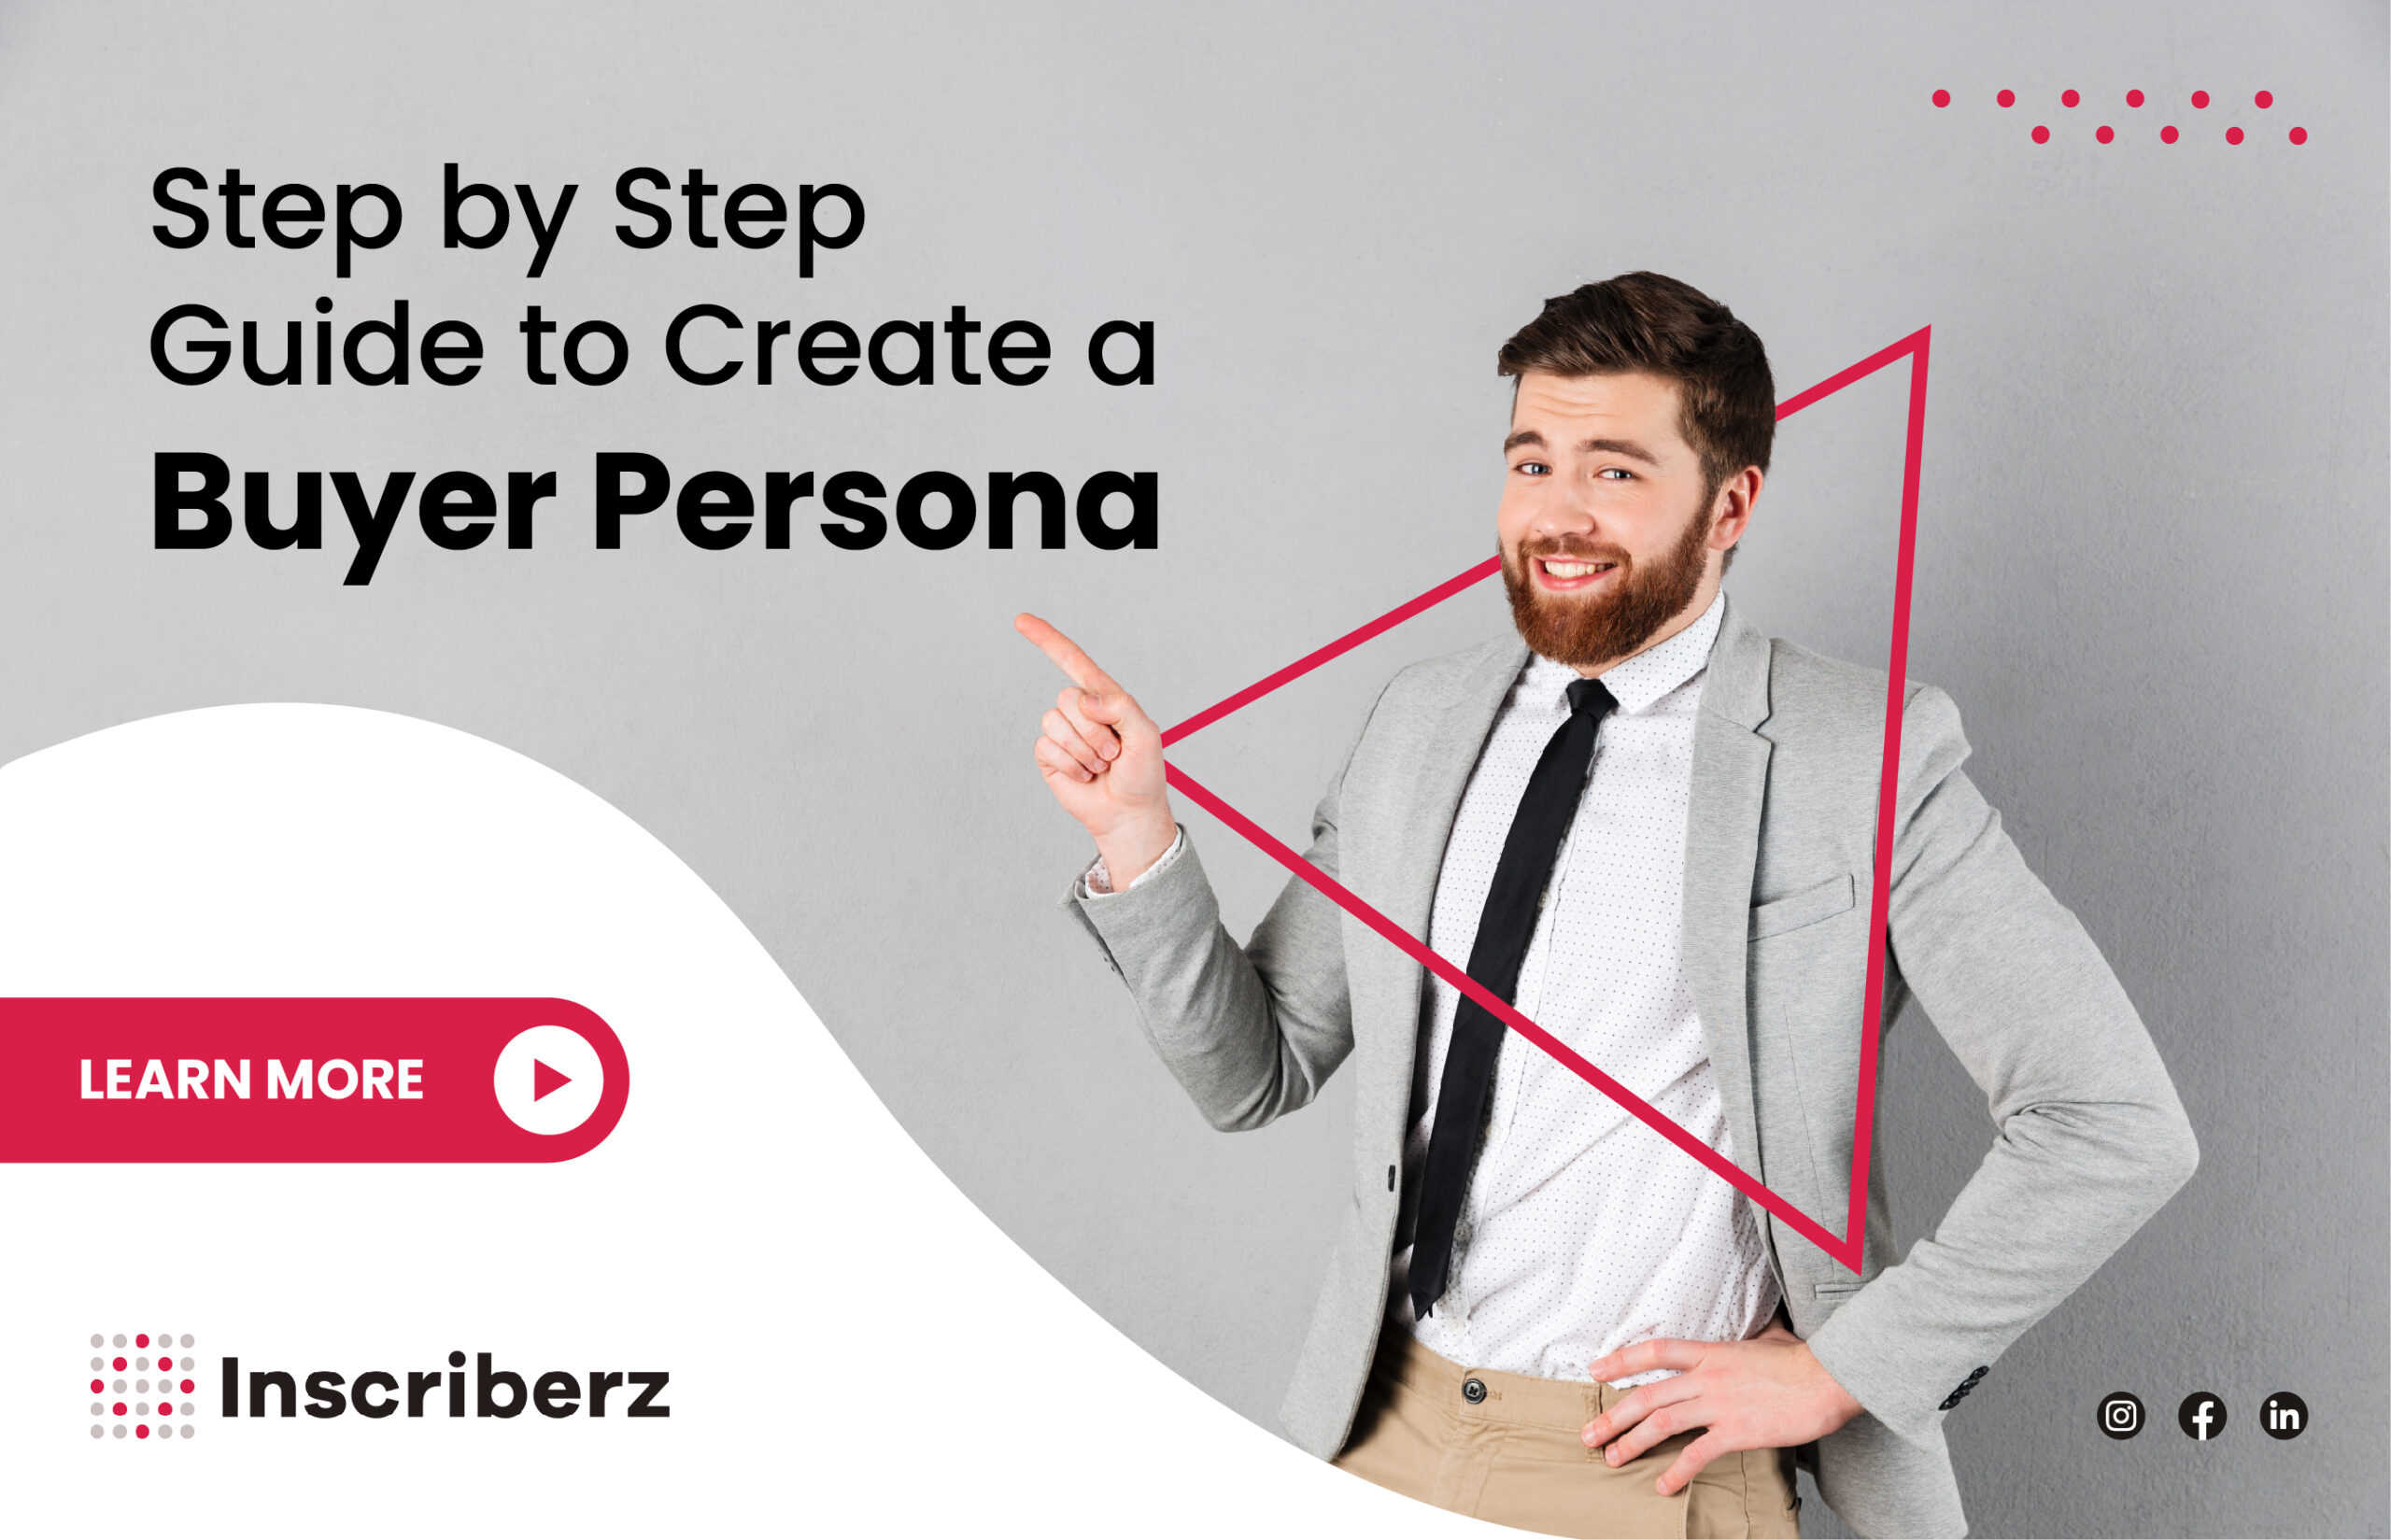 A creative showing a business professional pointing towards the title of the article about creating buyer personas